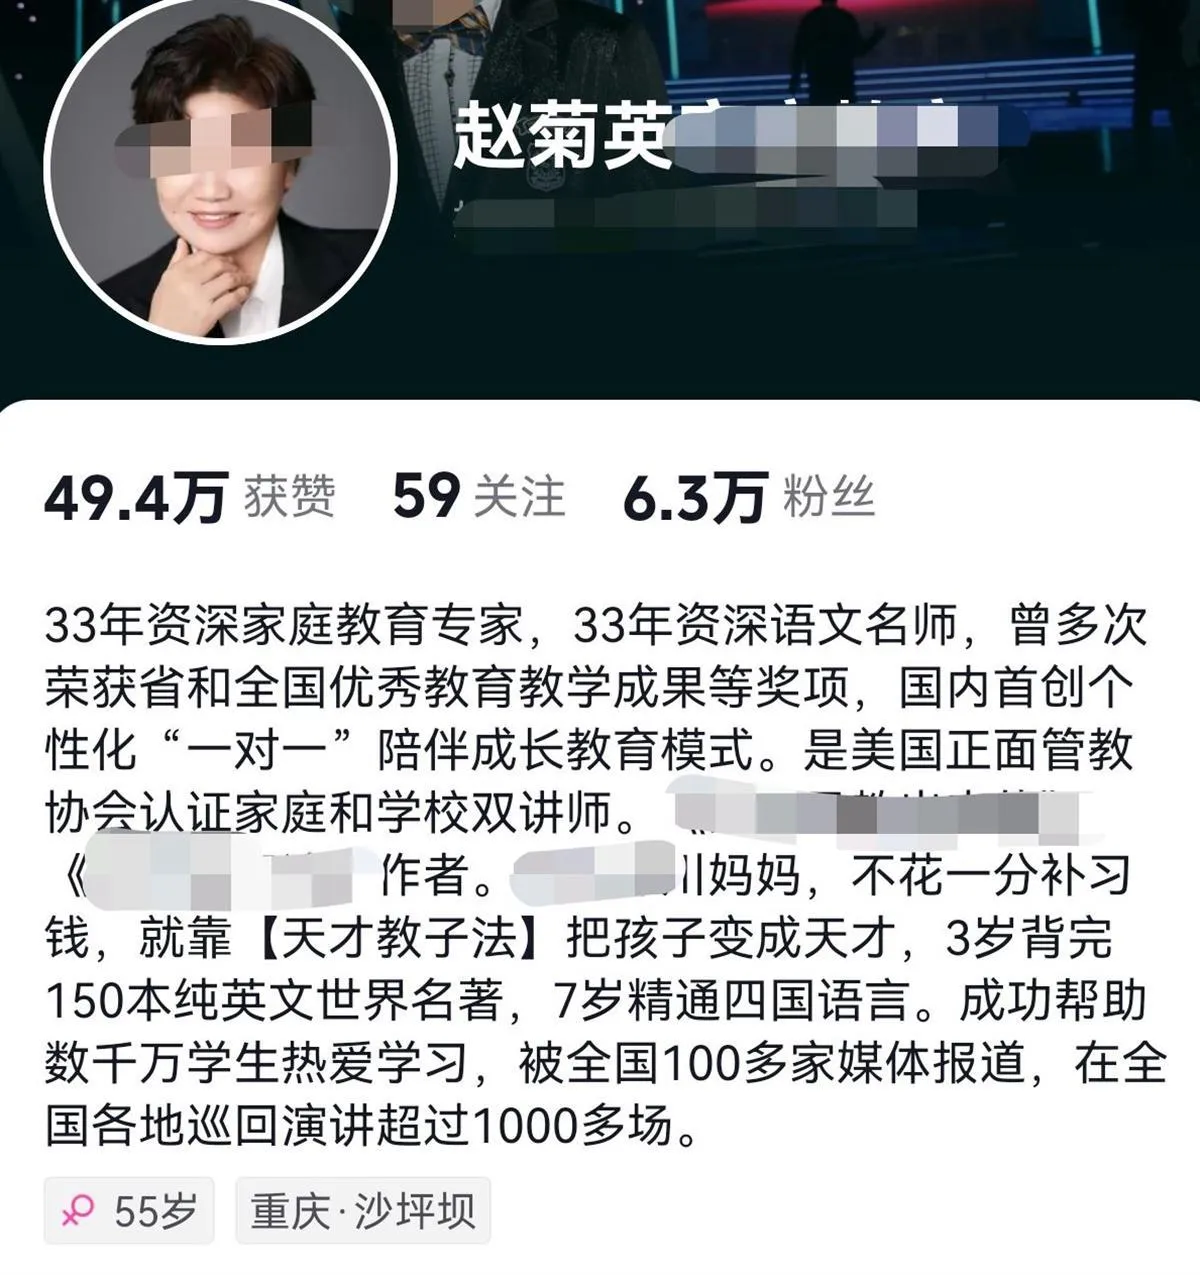 Jiayuguan City: Will intervene in investigation, education blogger's "toy smashing" style of rough home visit caused controversy